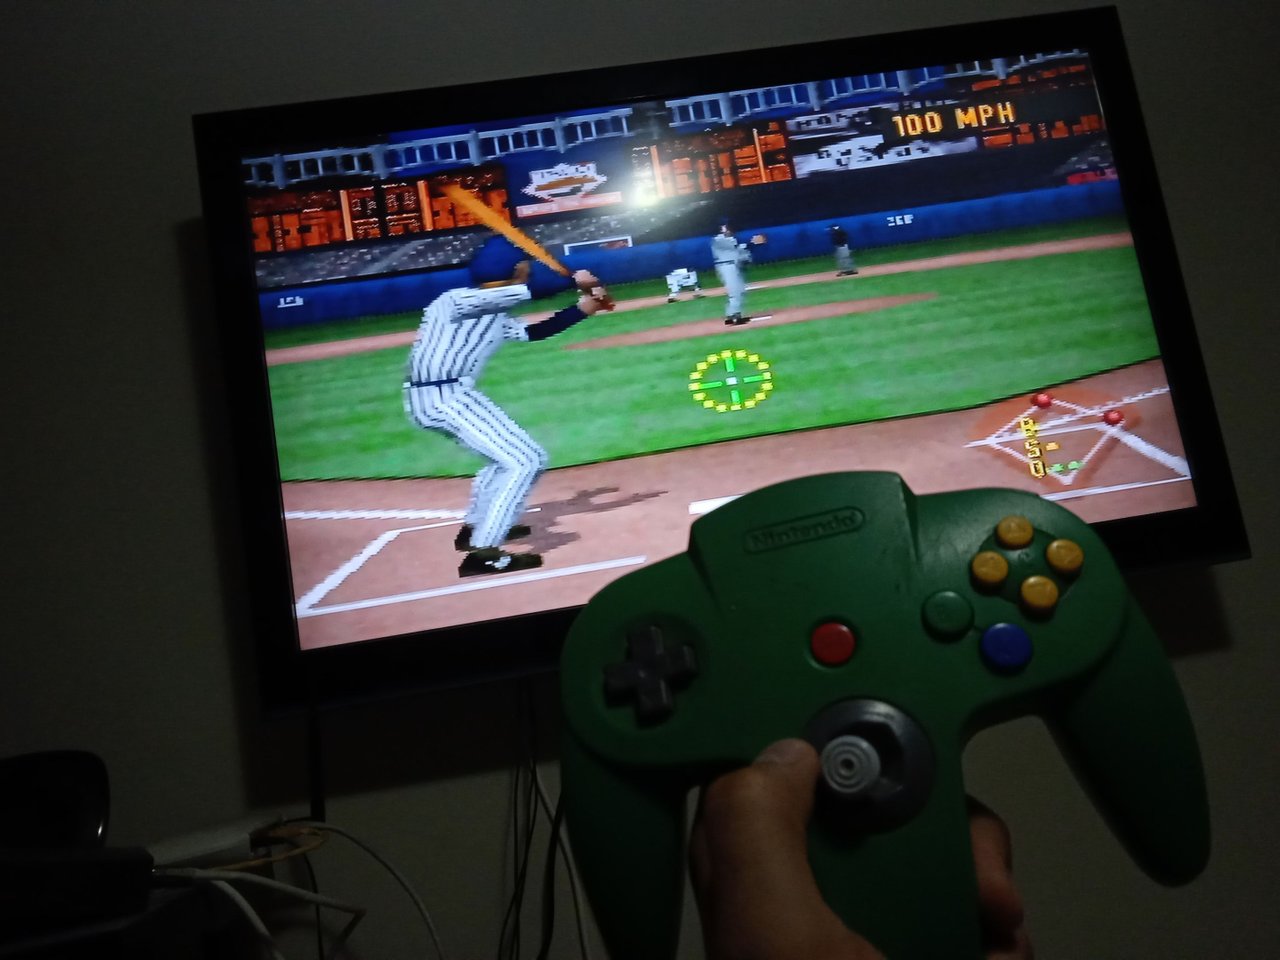 Archive 64: MLB Featuring Ken Griffey Jr. - Nintendo 64 (N64) Review